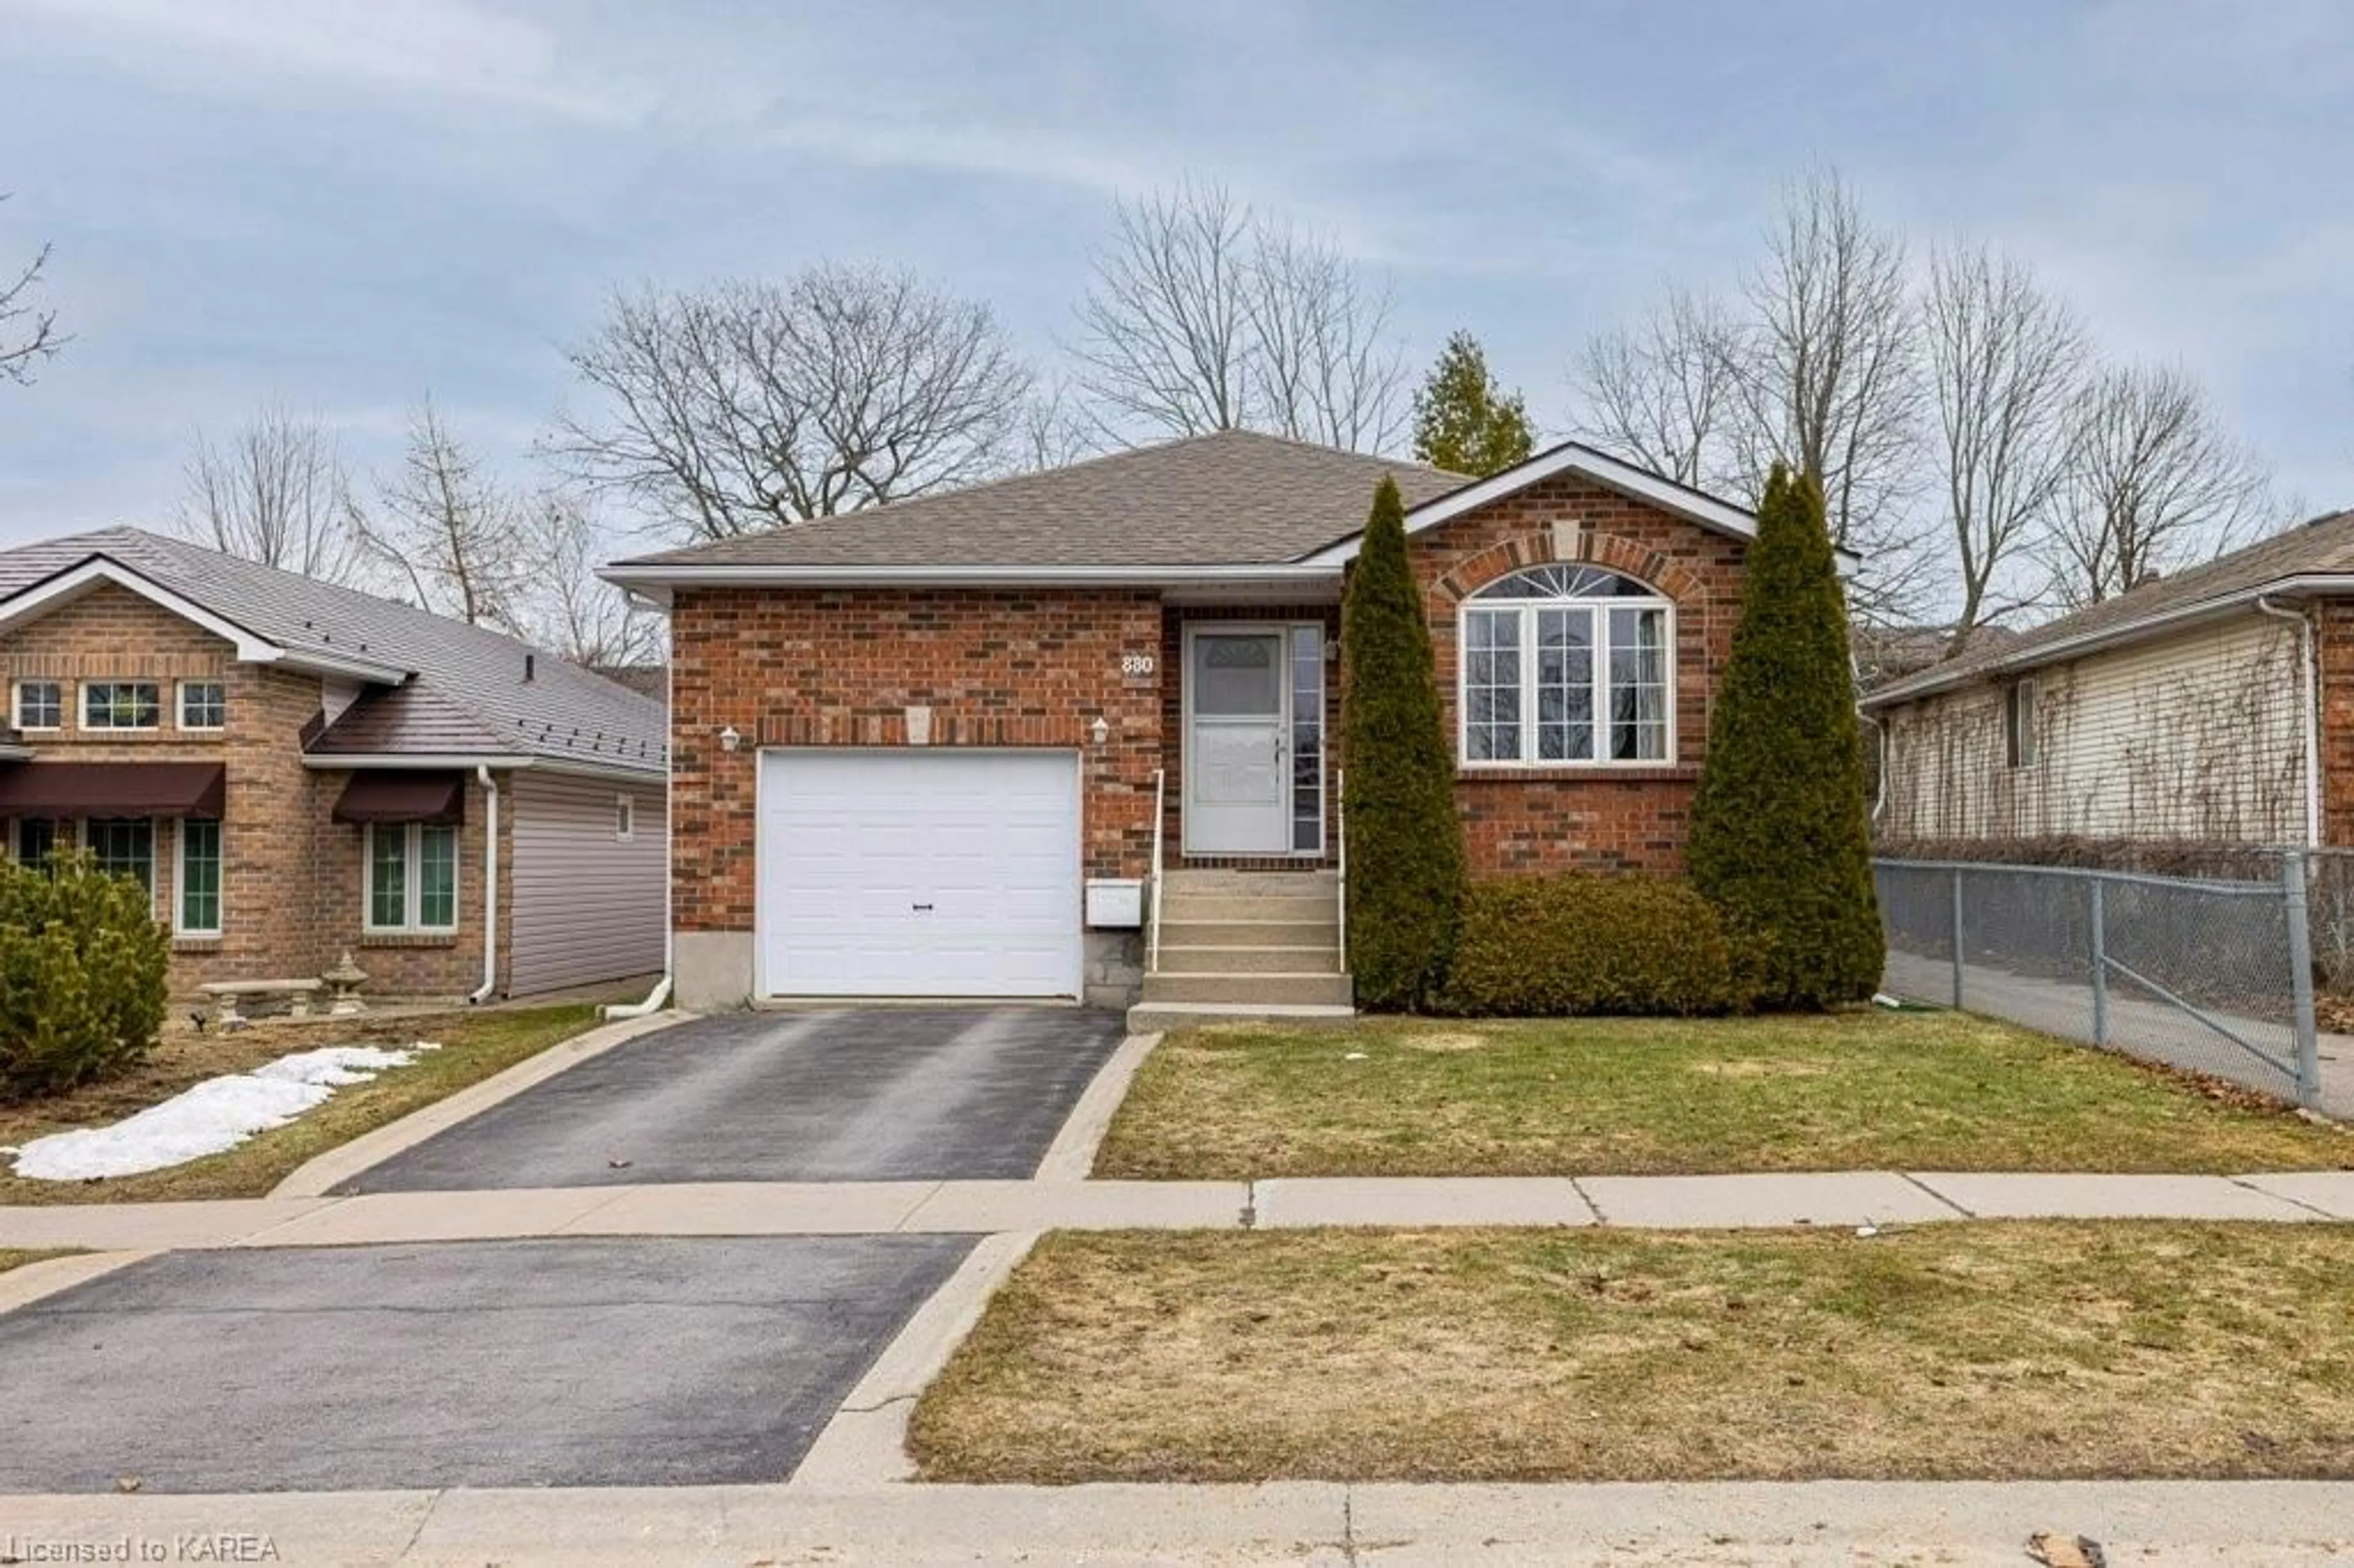 Home with brick exterior material for 880 Ringstead St, Kingston Ontario K7M 9A3